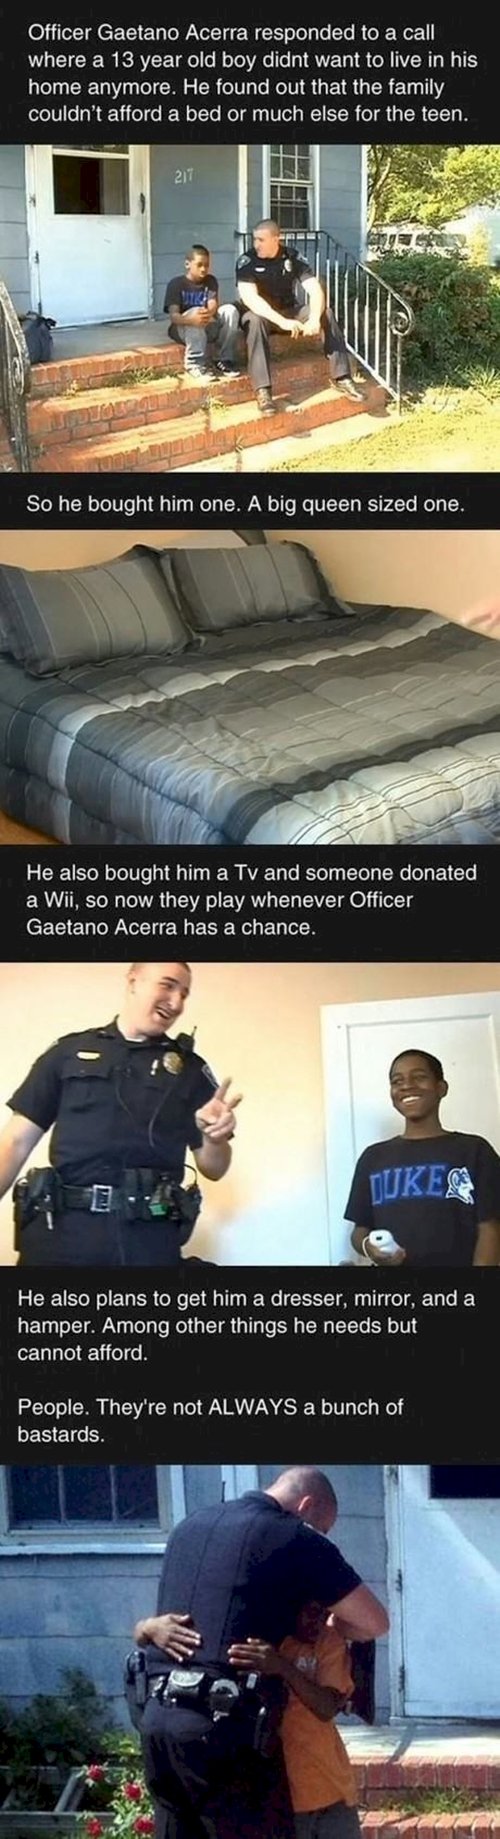 faith-in-humanity-officer